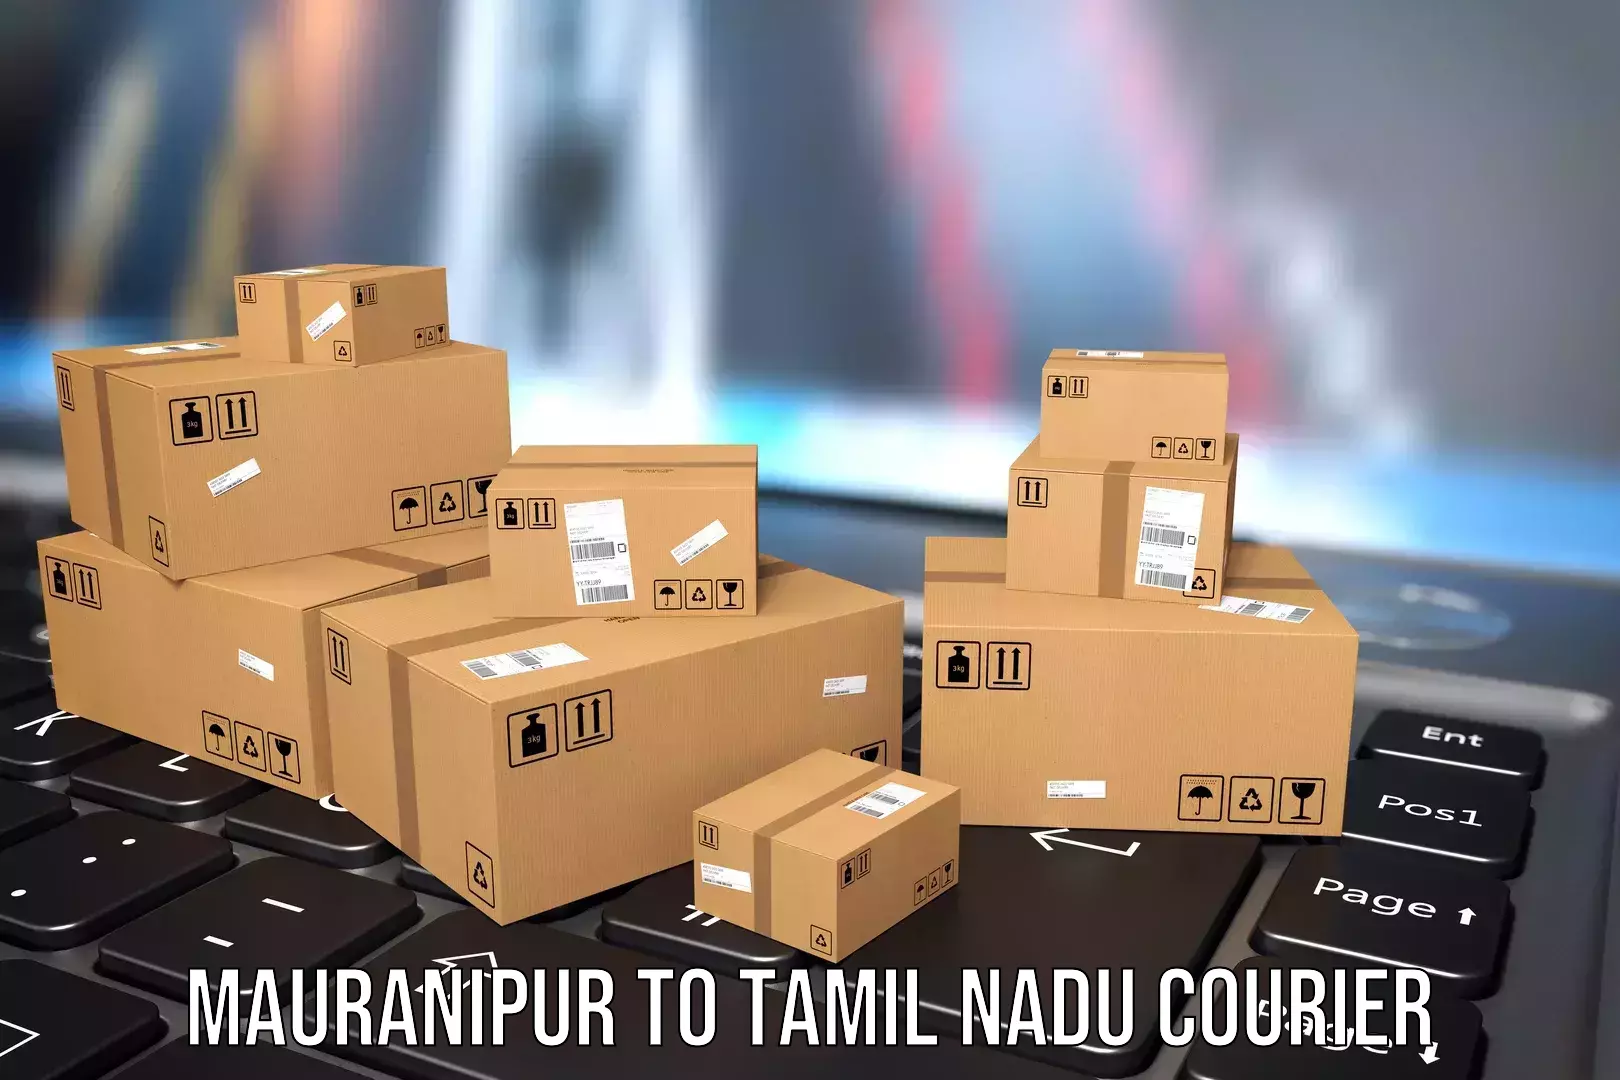 Baggage relocation service Mauranipur to Tamil Nadu